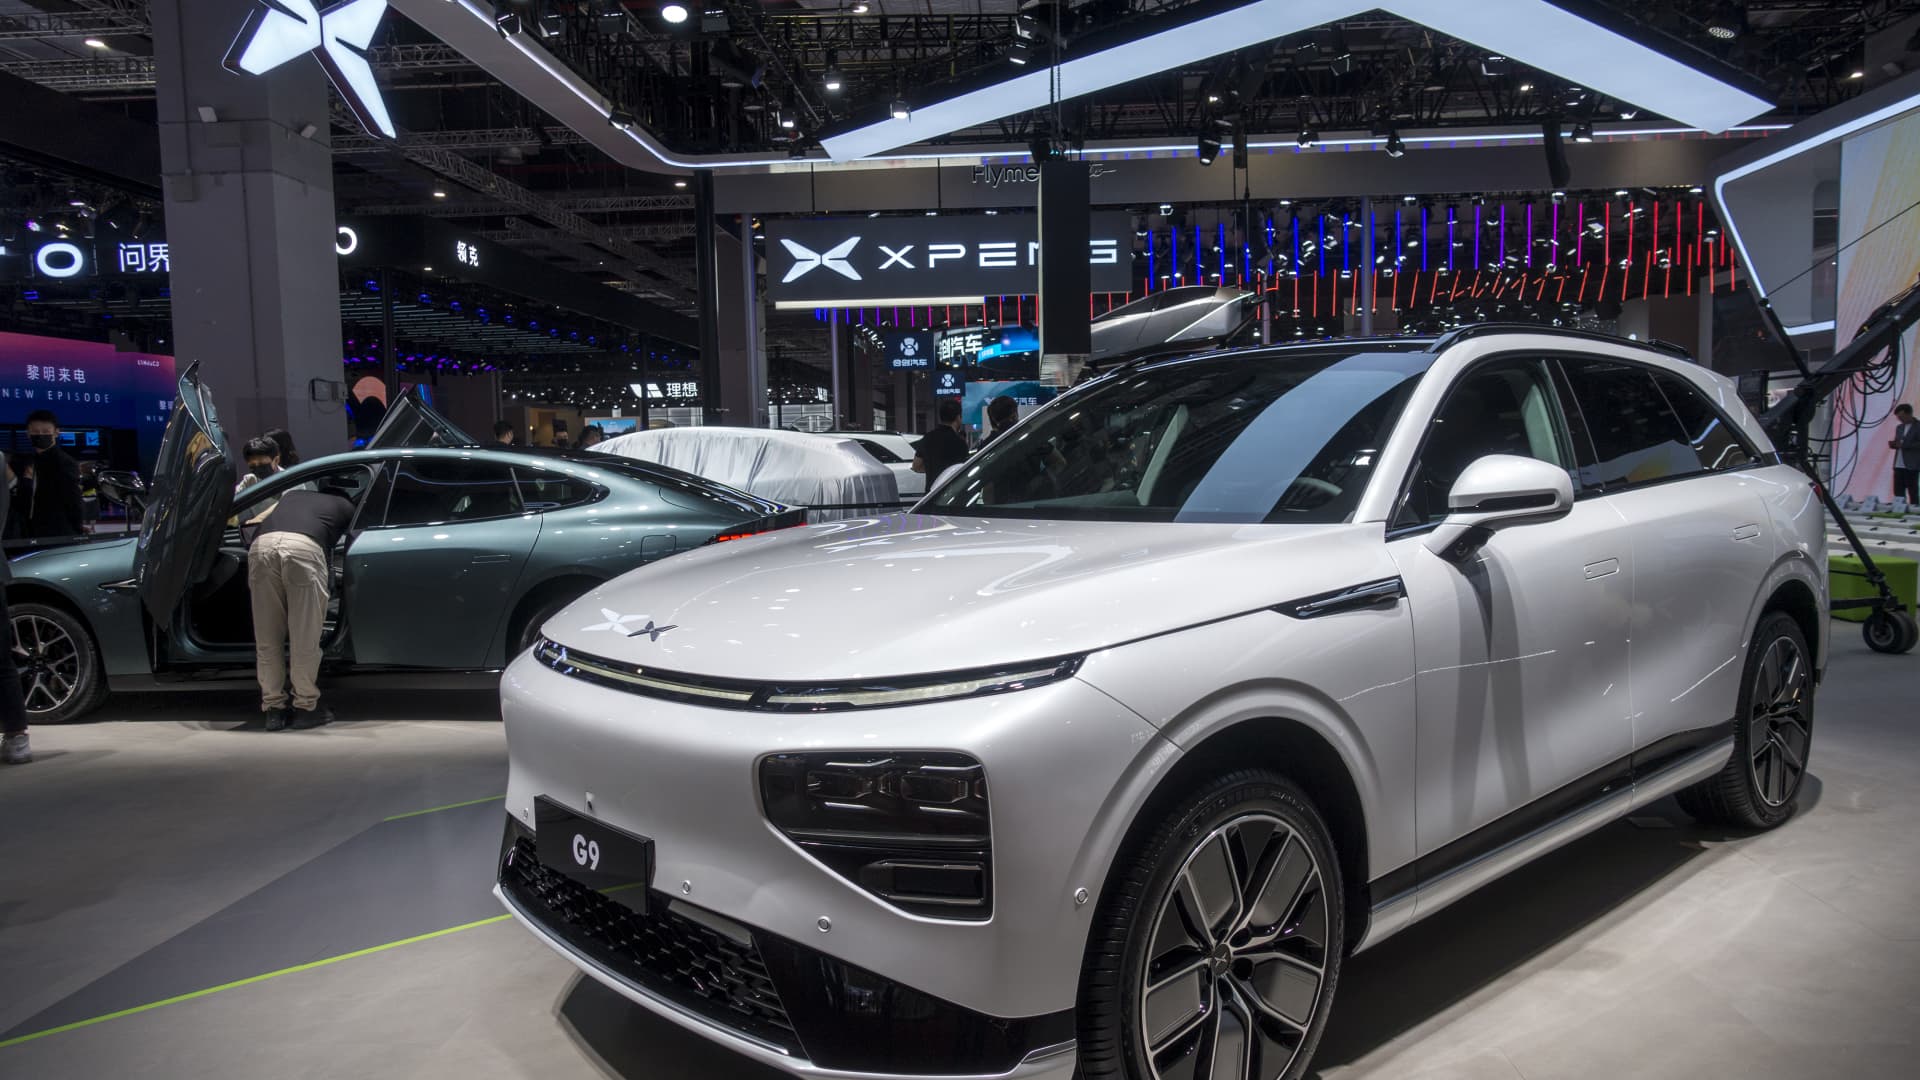 Xpeng plans to hire 4,000 people, invest in AI as CEO warns intense EV rivalry may end in ‘bloodbath’